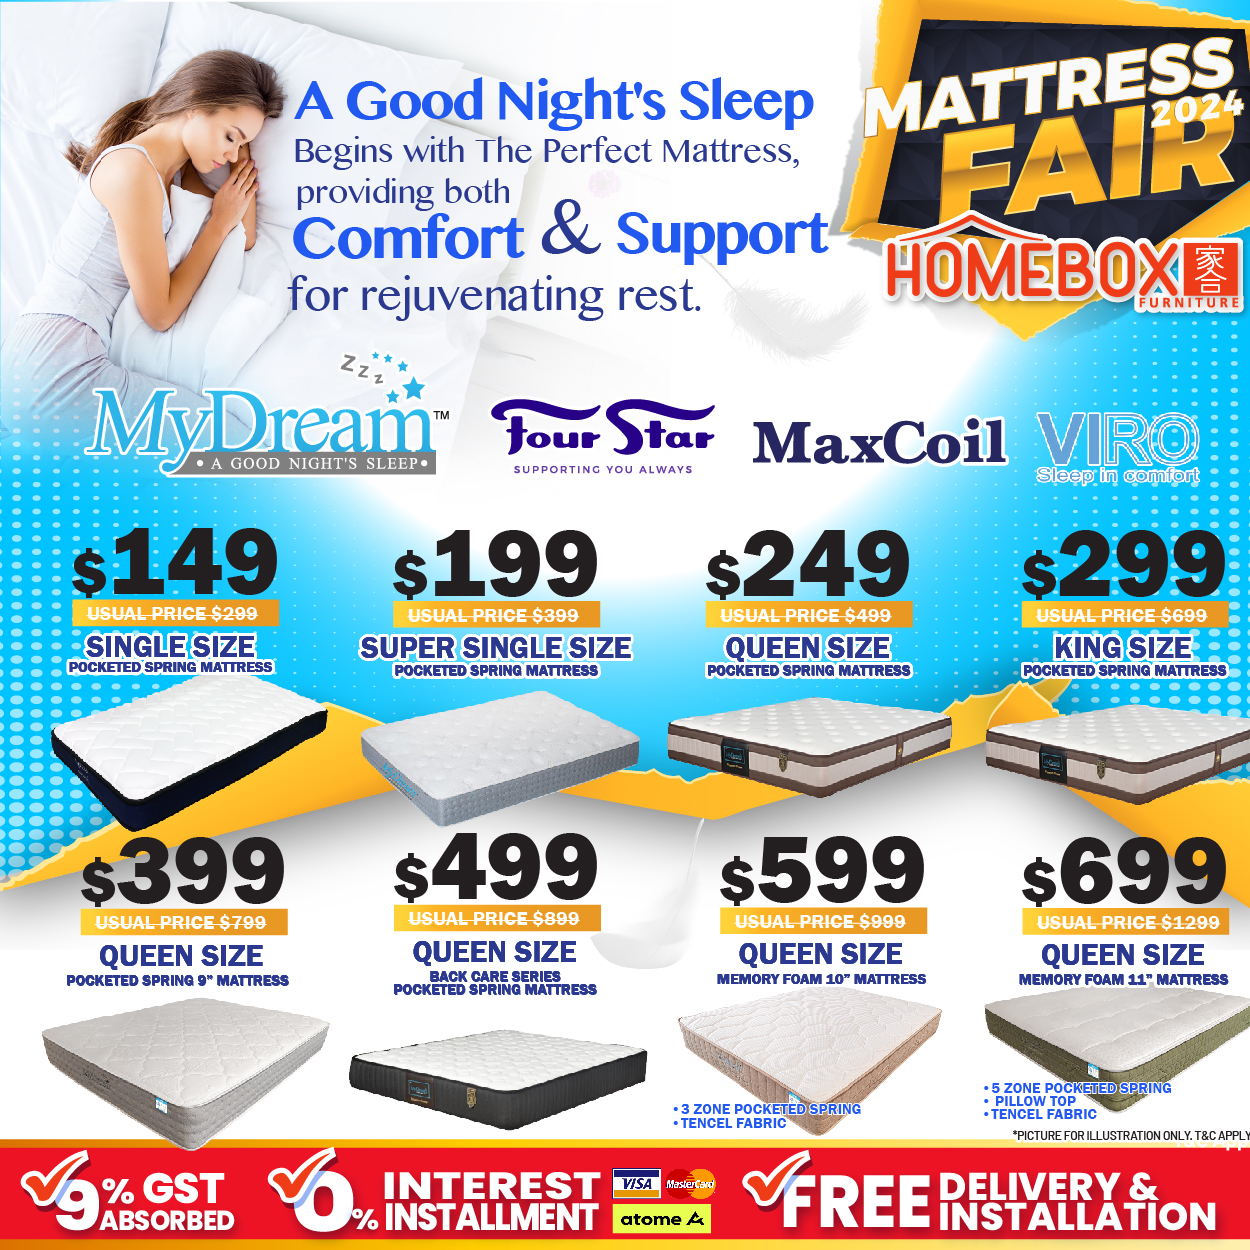 Lobang: Homebox's Biggest Mattress Fair in Aljunied Has Everything At Up To 80% Off From Now Till 5 May 24. Get A Free Mattres Upgrade During The Sale! - 17